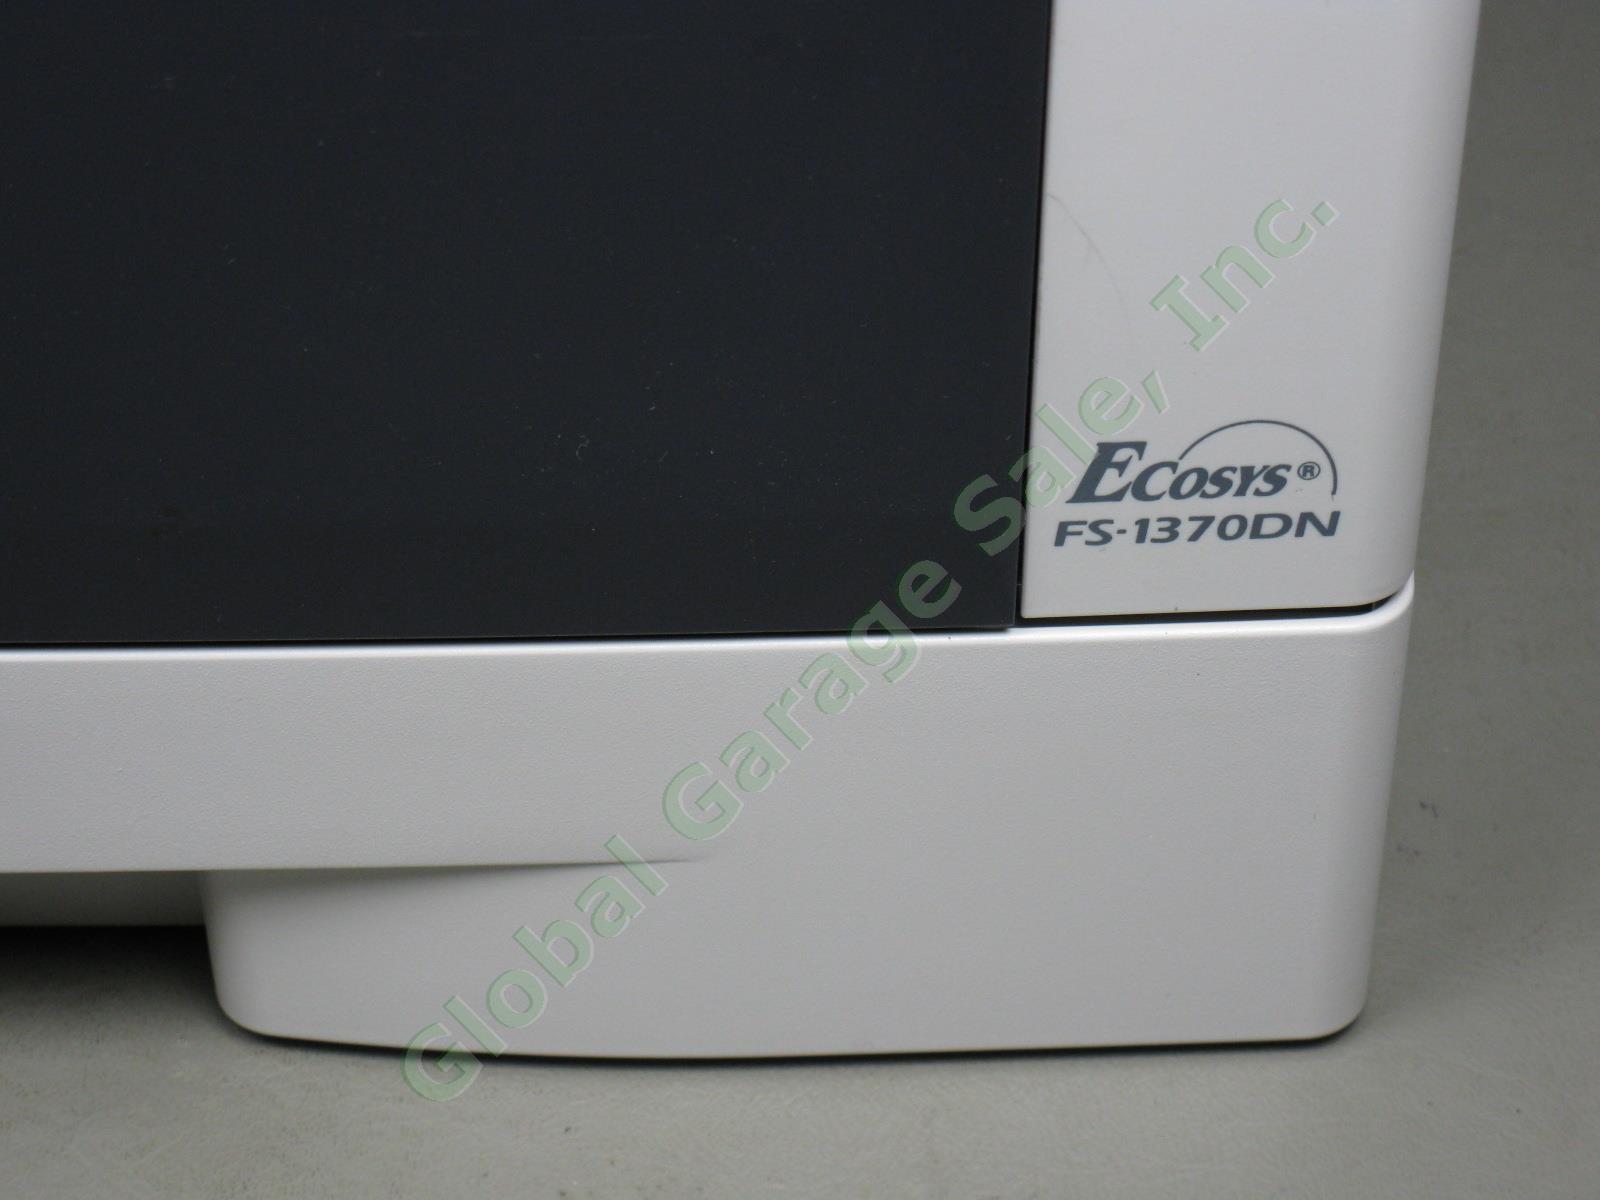 Kyocera Ecosys FS-1370DN Workgroup Network Laser Printer w/Toner 14509 Pages EXC 1